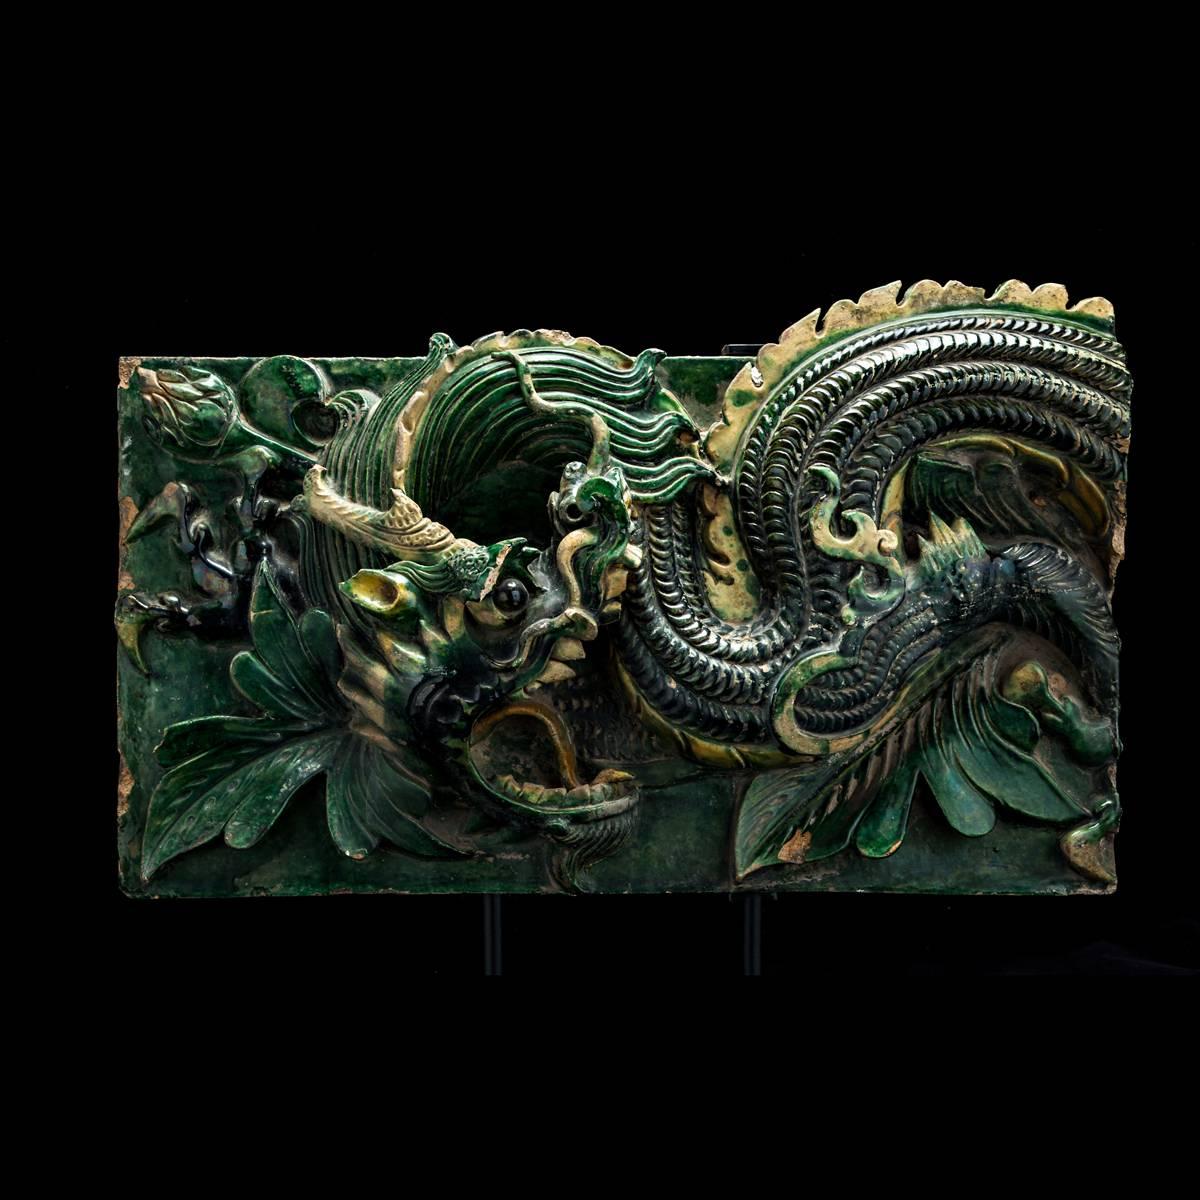 Pair of Ming Glazed Terracotta Temple Wall Tiles Depicting a Dragon In Good Condition For Sale In Beverly Hills, CA